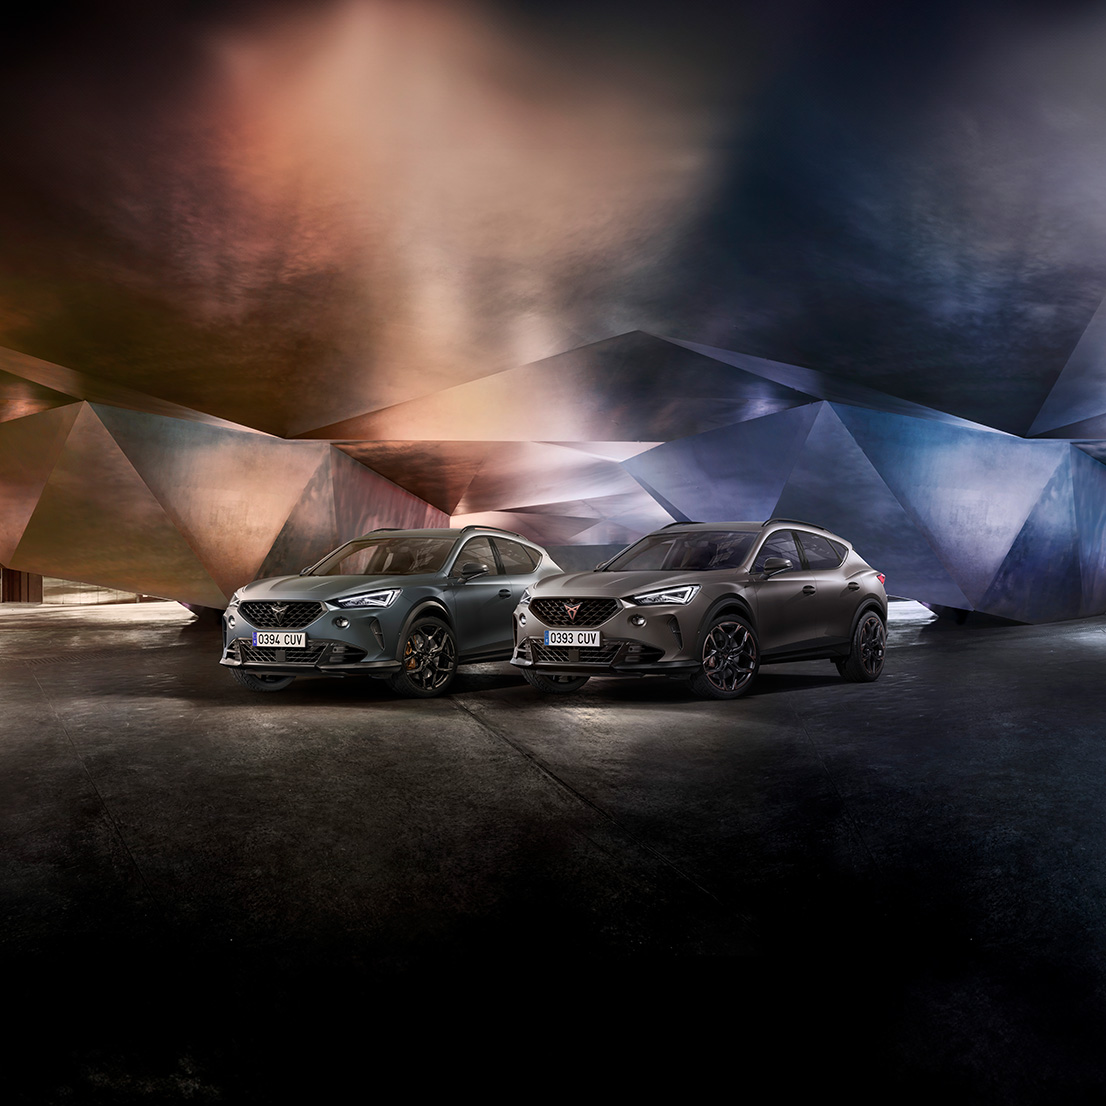 CUPRA Formentor VZ5 models in Century Bronze and Enceladus Grey – Special Limited Editions